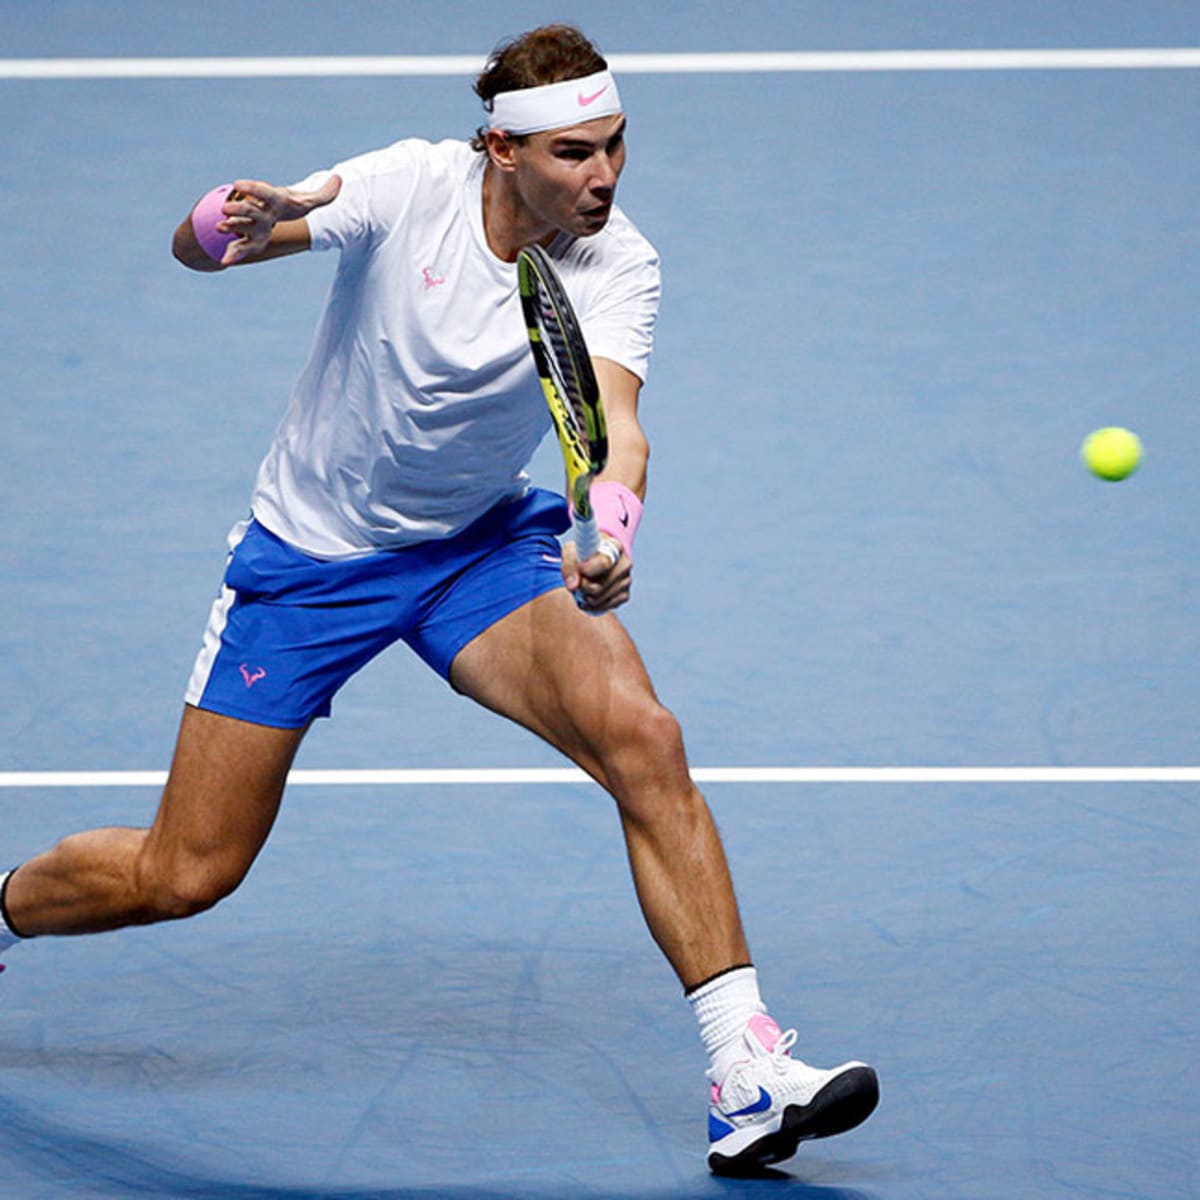 21 Astonishing Tennis Shots That Should Have Been Impossible to Pull Off